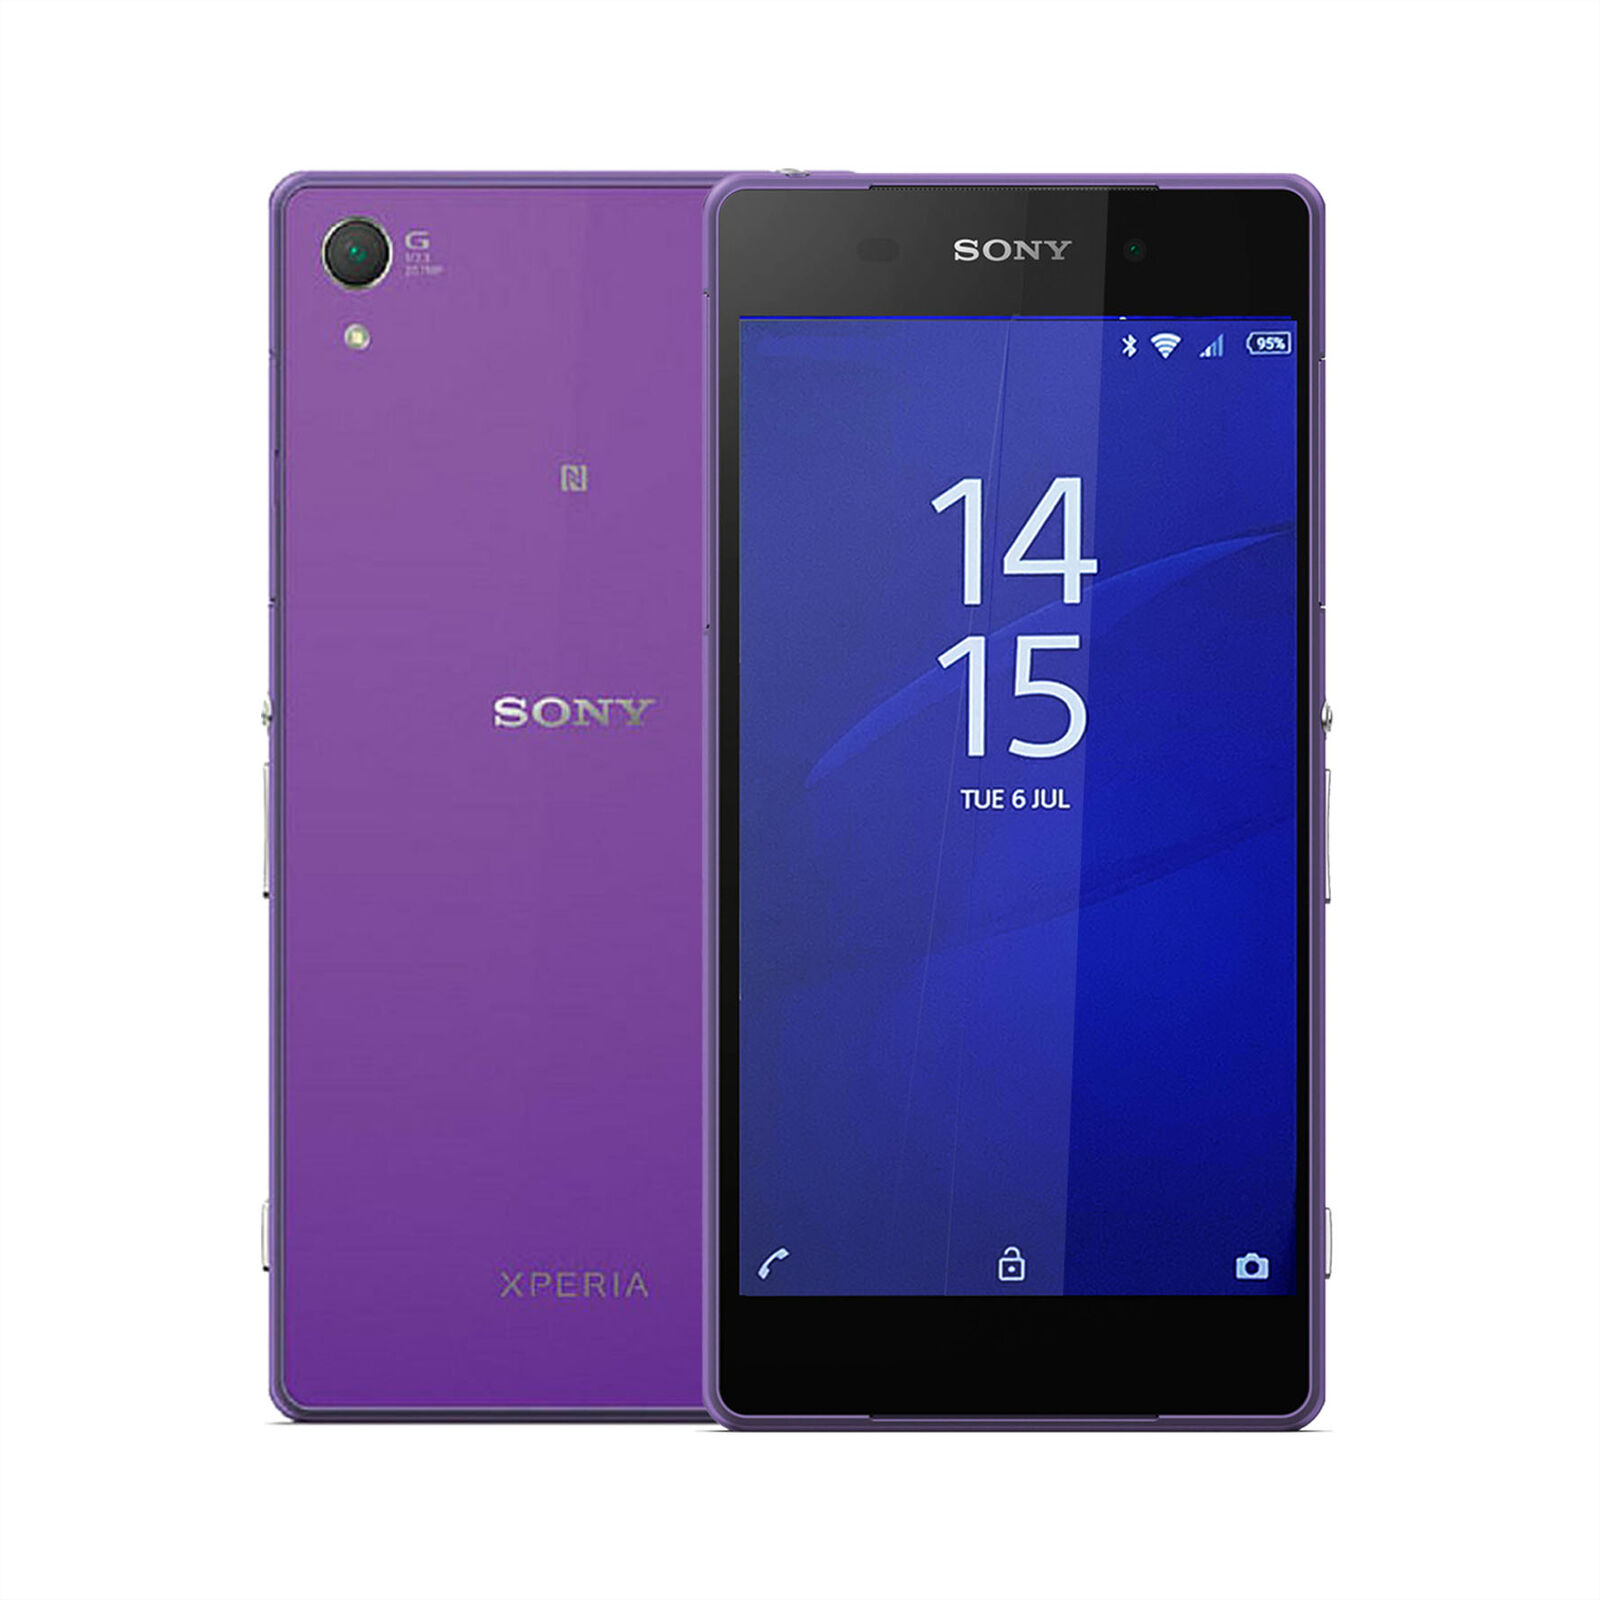 Wireless Charging On Sony Xperia Z2: A How-To Guide